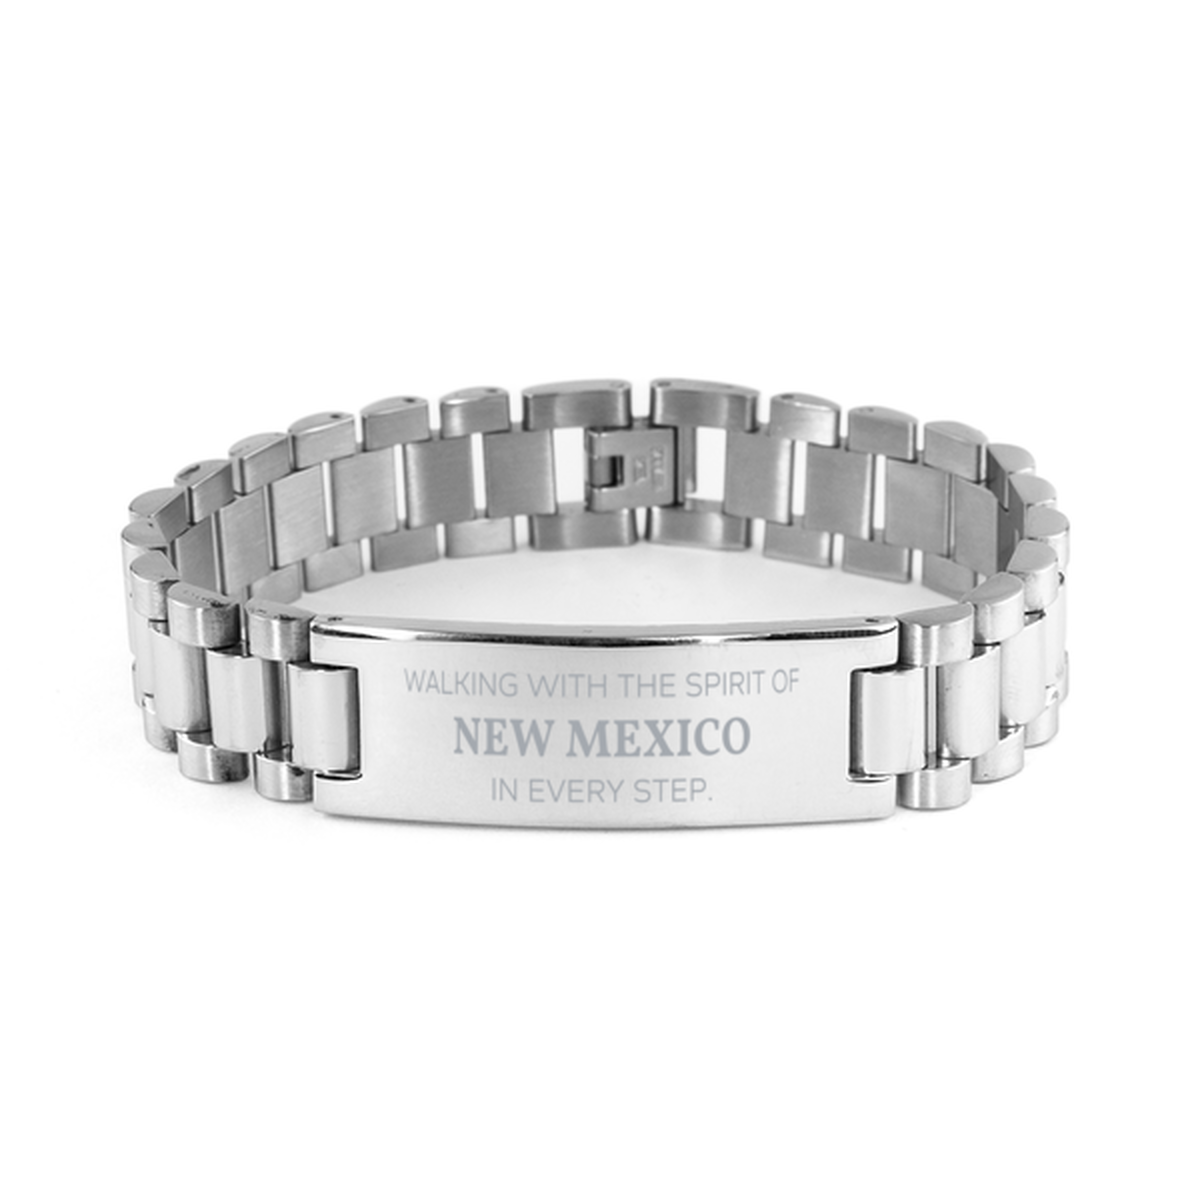 New Mexico Gifts, Walking with the spirit, Love New Mexico Birthday Christmas Ladder Stainless Steel Bracelet For New Mexico People, Men, Women, Friends